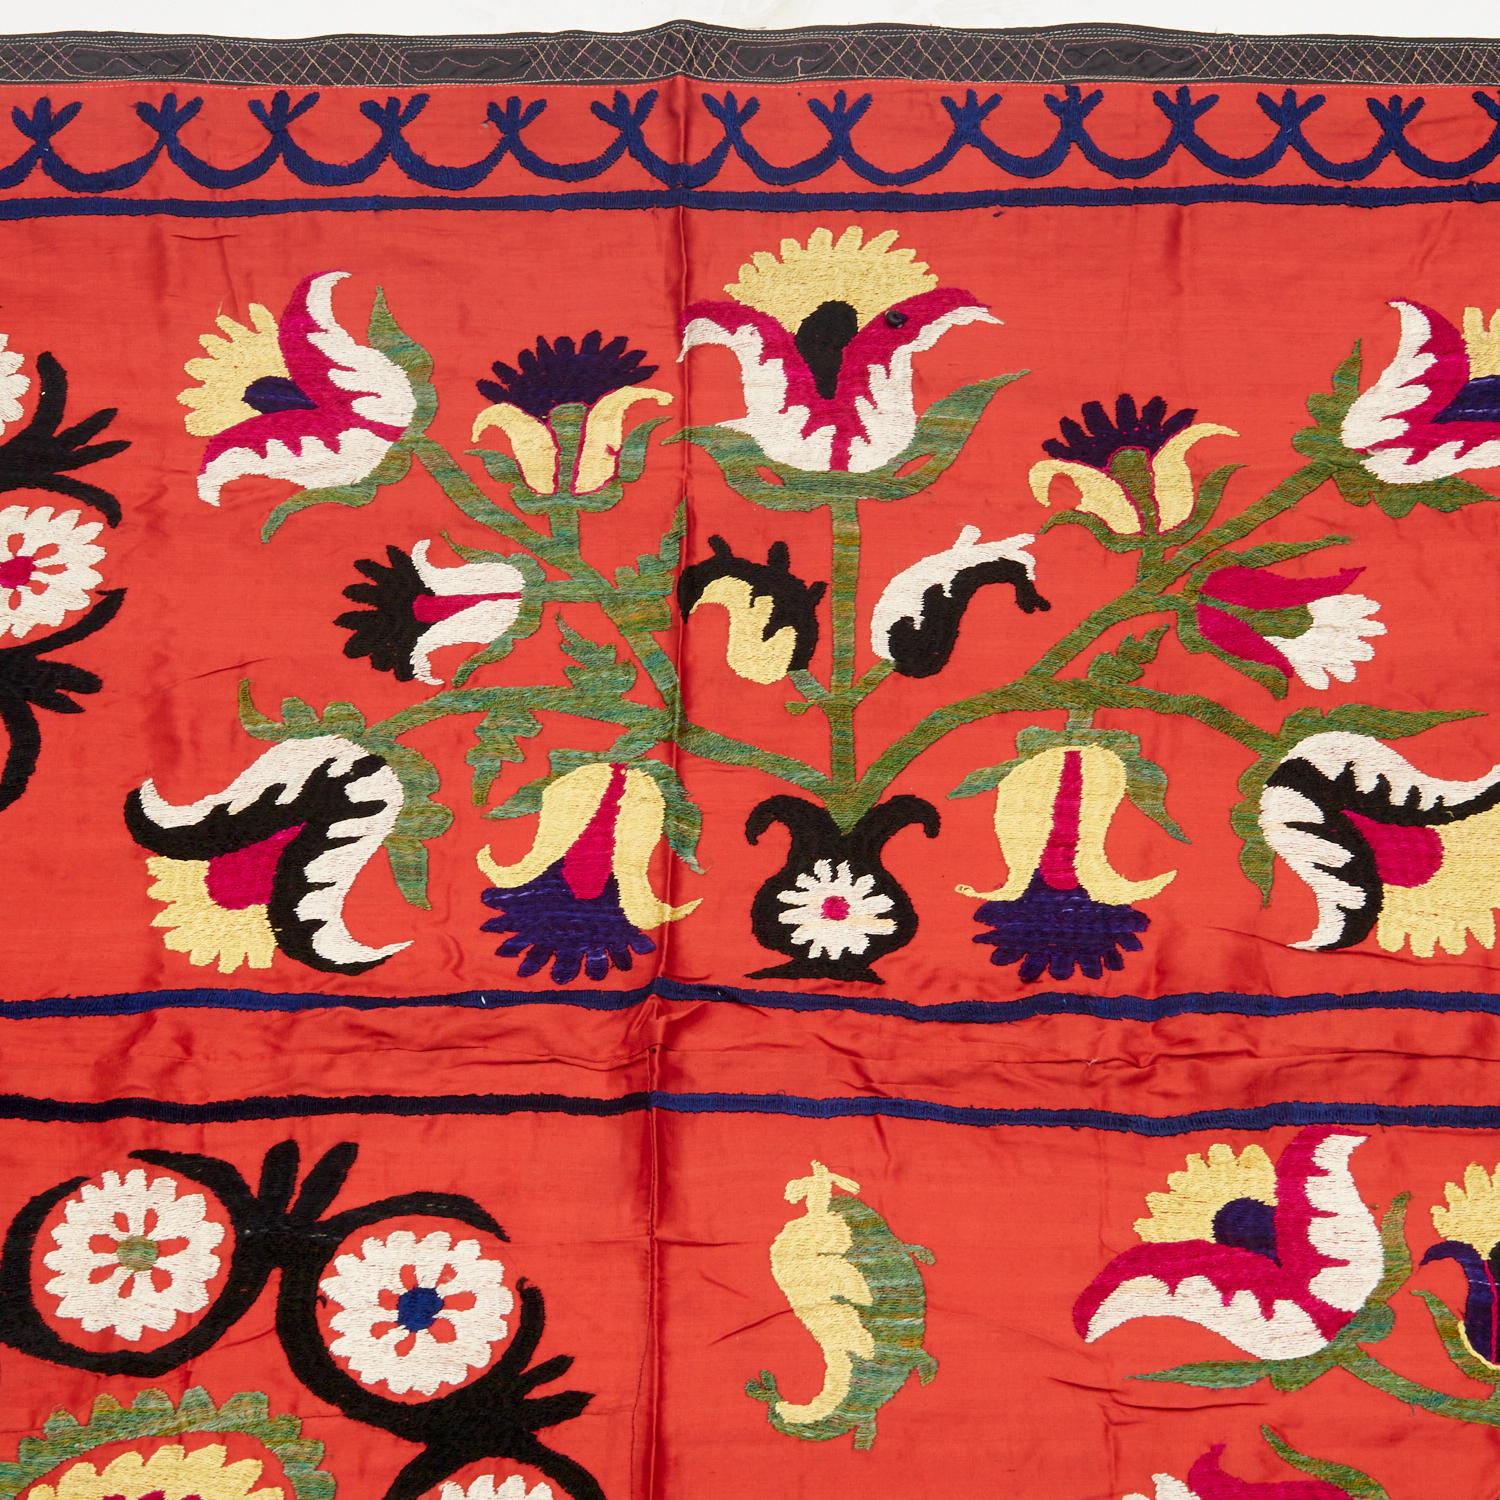 From the collection of visual artist Lewis Stein, NYC, two late 20th c., embroidered Suzani style textiles, probably Uzbekistan, each with colorful embroidered floral design, the larger example with embroidered text and yellow fringe.